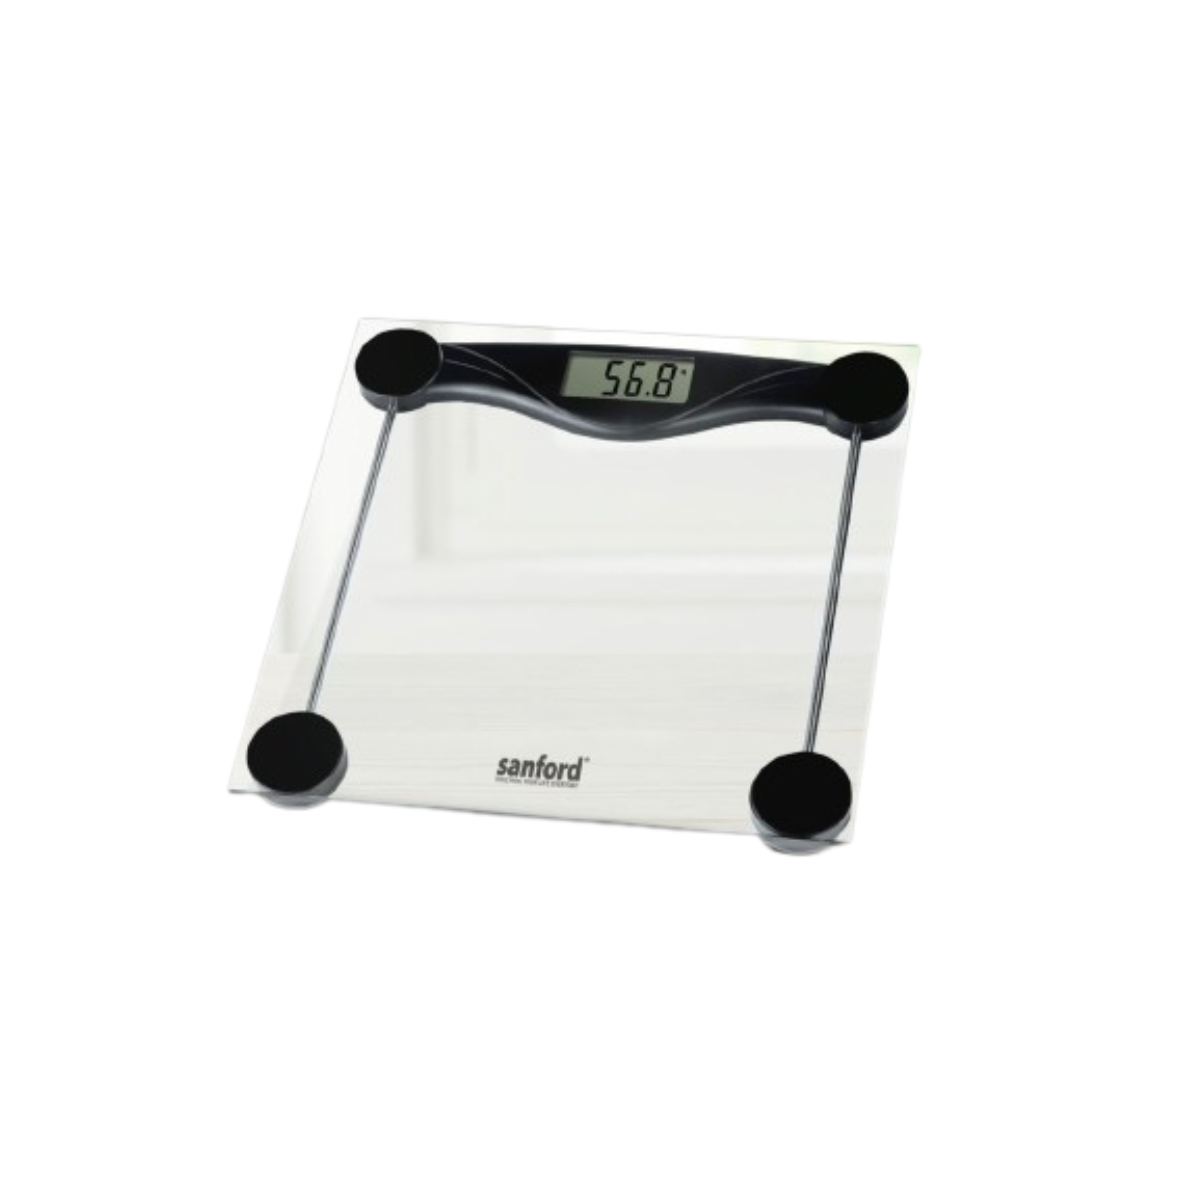 Sanford Personal Scale - SF1507PS - Grey White